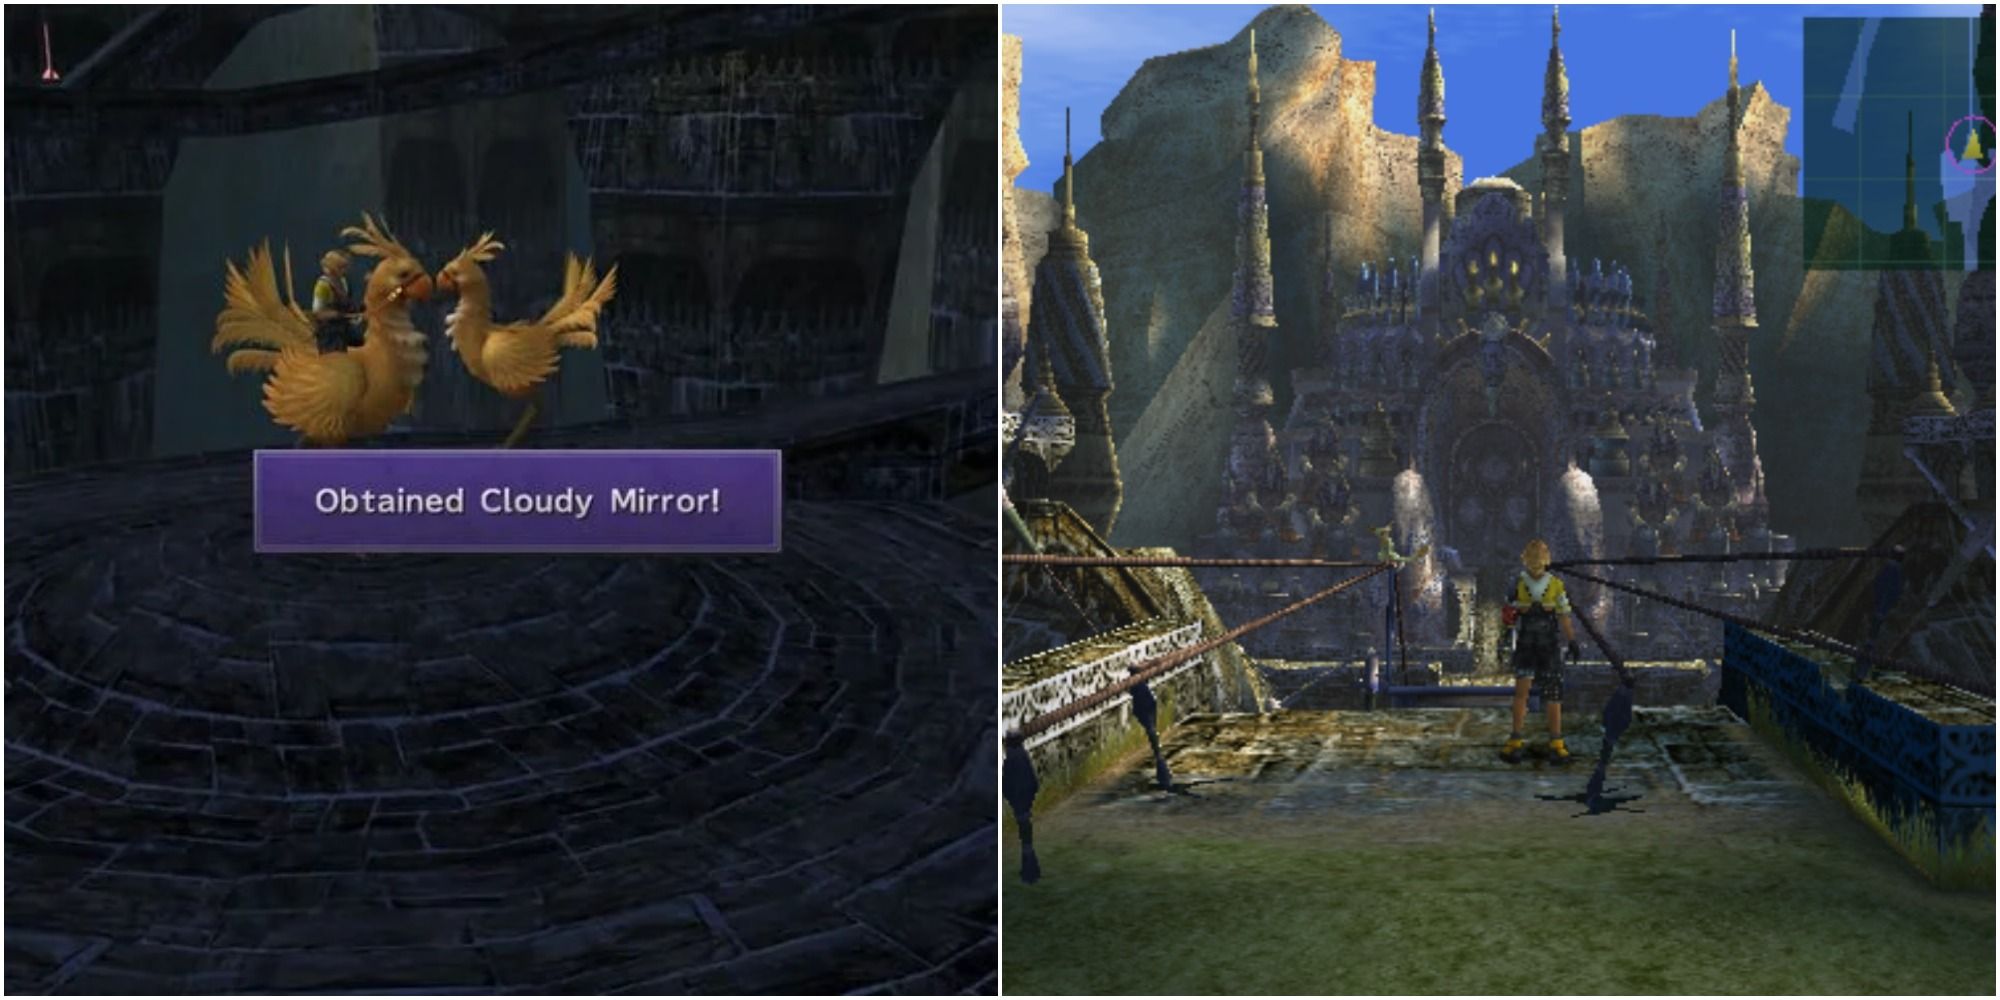 FF 10 Cloudy Mirror at Remiem Temple with Chocobo race